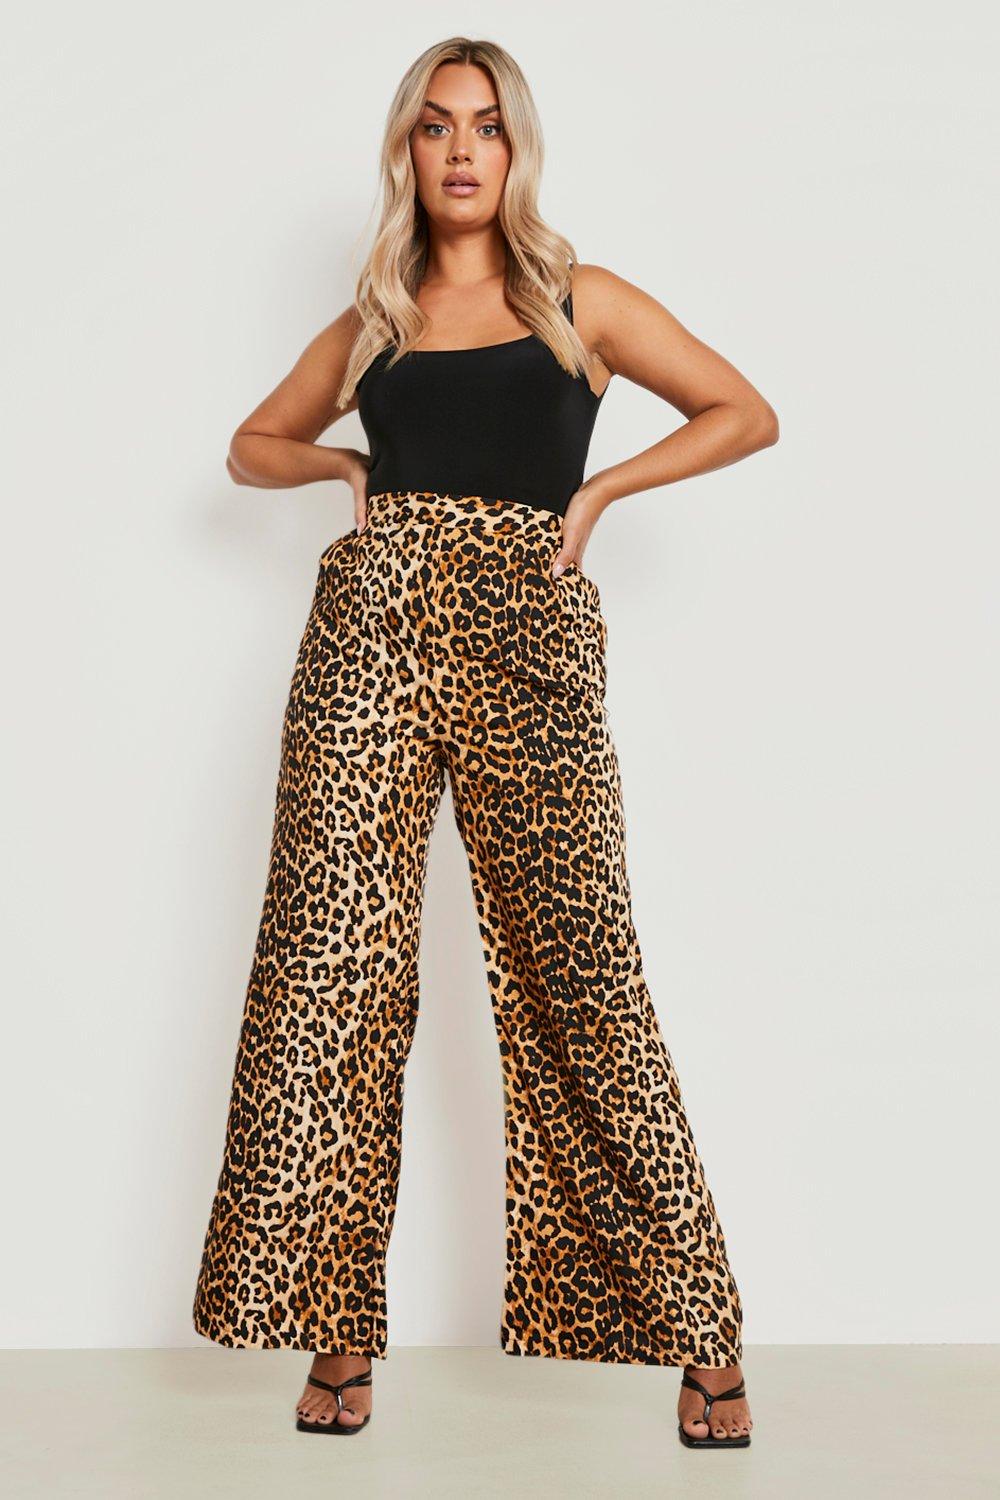 High Waist Leopard Print Flare Leggings - ChicBohoStyle – Chic